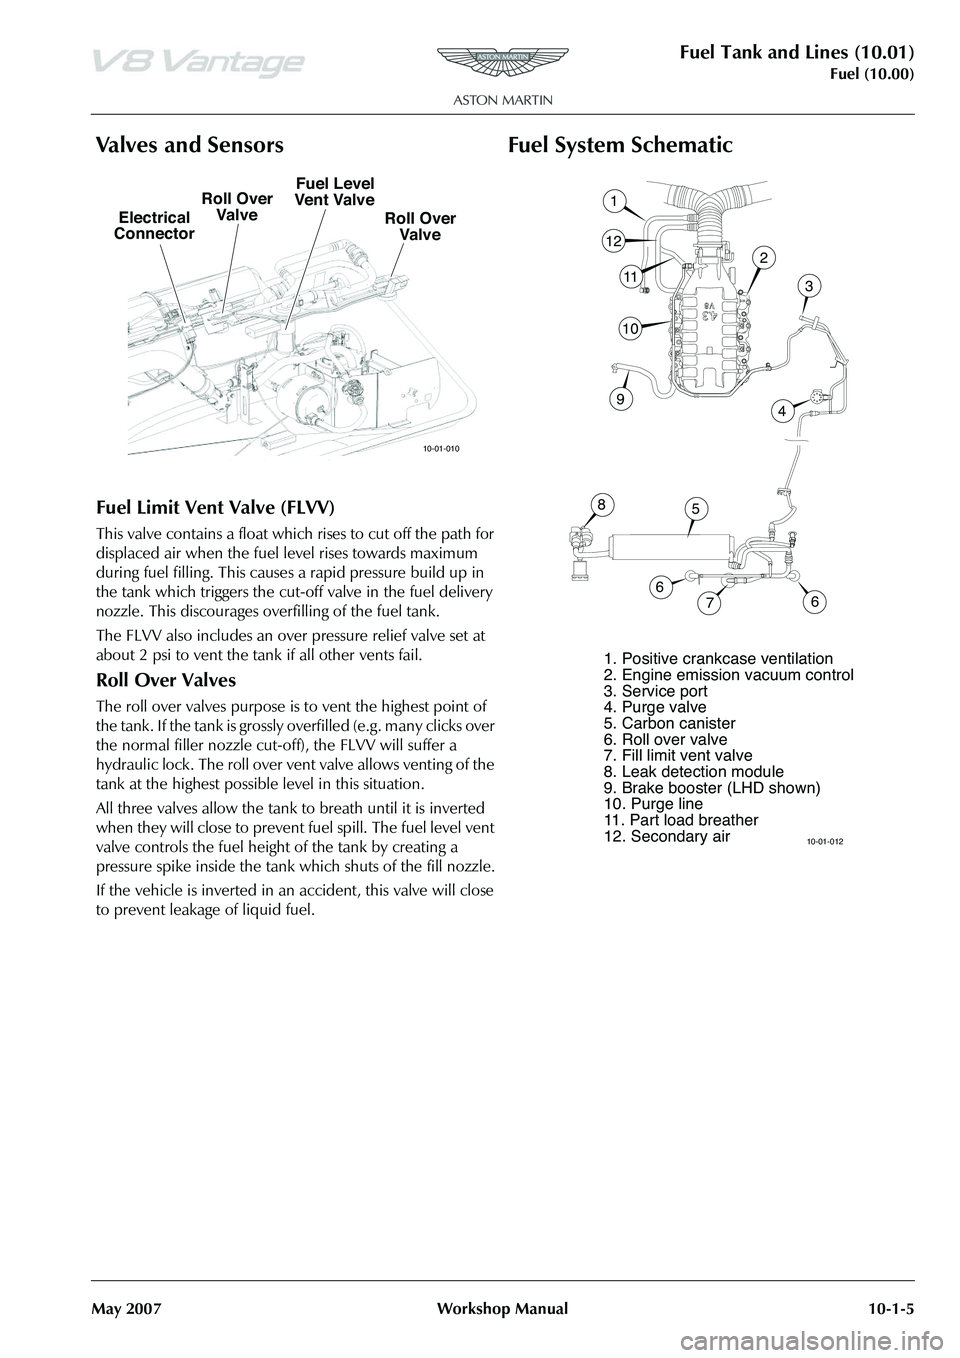 ASTON MARTIN V8 VANTAGE 2010 Owners Guide Fuel Tank and Lines (10.01)
Fuel (10.00)
May 2007 Workshop Manual 10-1-5
Va l v e s  a n d  S e n s o r s
���������
�(�O�H�F�W�U�L�F�D�O
�&�R�Q�Q�H�F�W�R�U �5�R�O�O��2�Y�H�U
�9�D�O�Y�H �)�X�